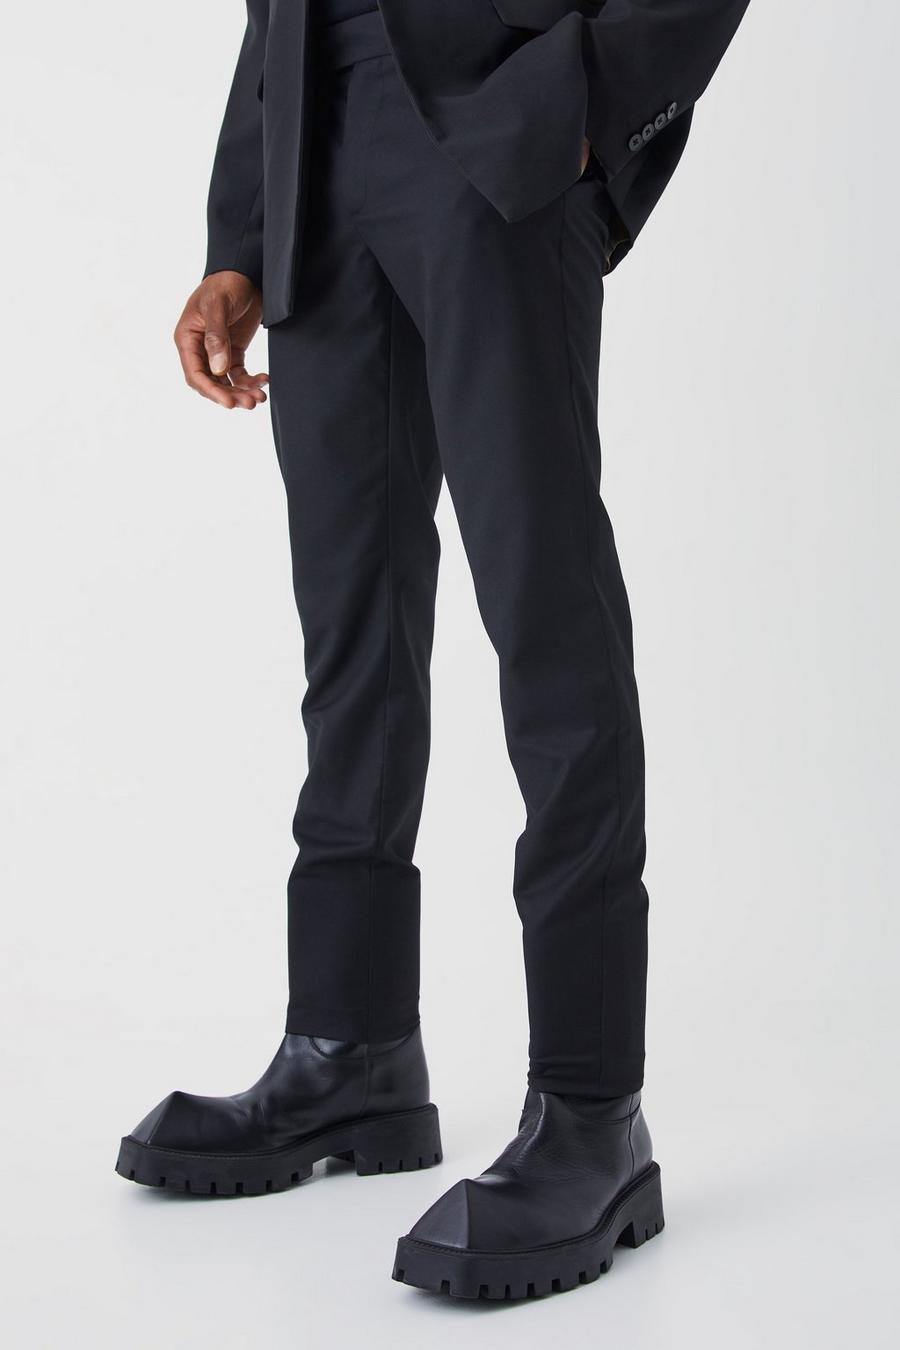 Black Skinny Fit Tailored Trouser